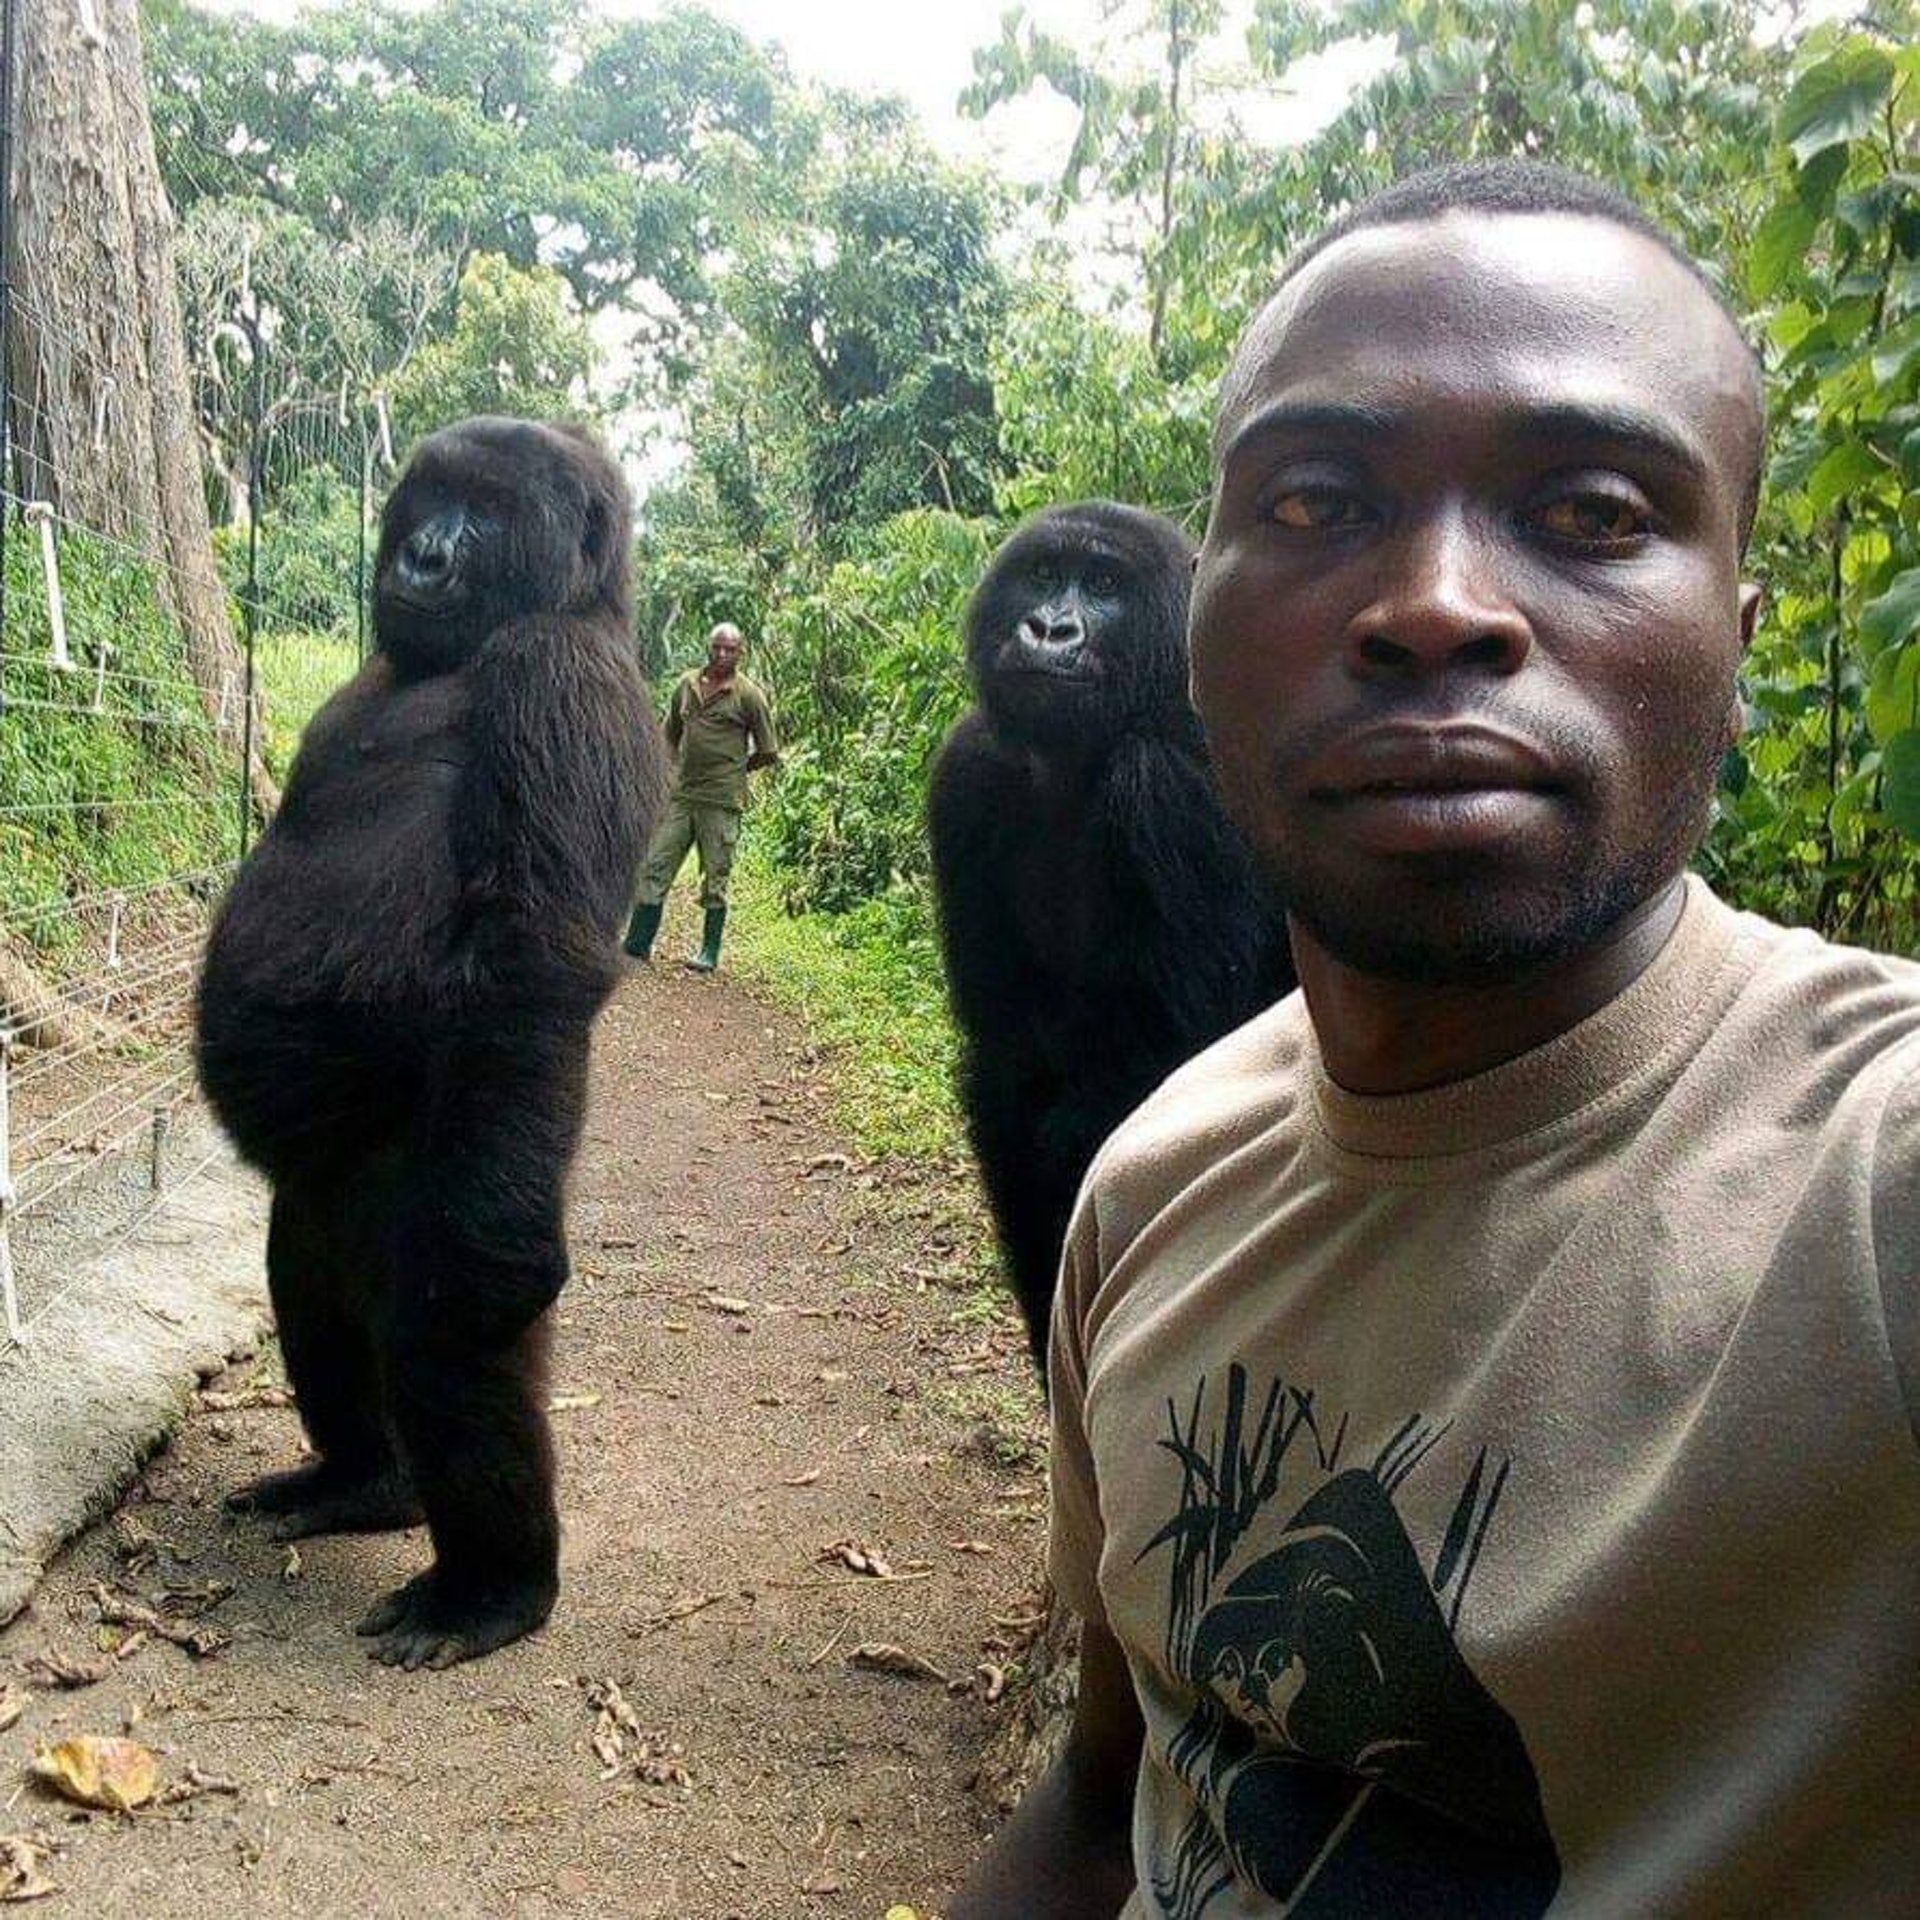 Senkwekwe center at Virunga National Park received dozens of messages about the photo. YES, it's real! Apparently those gorilla gals are always acting cheeky so this was the perfect shot of their true personalities!